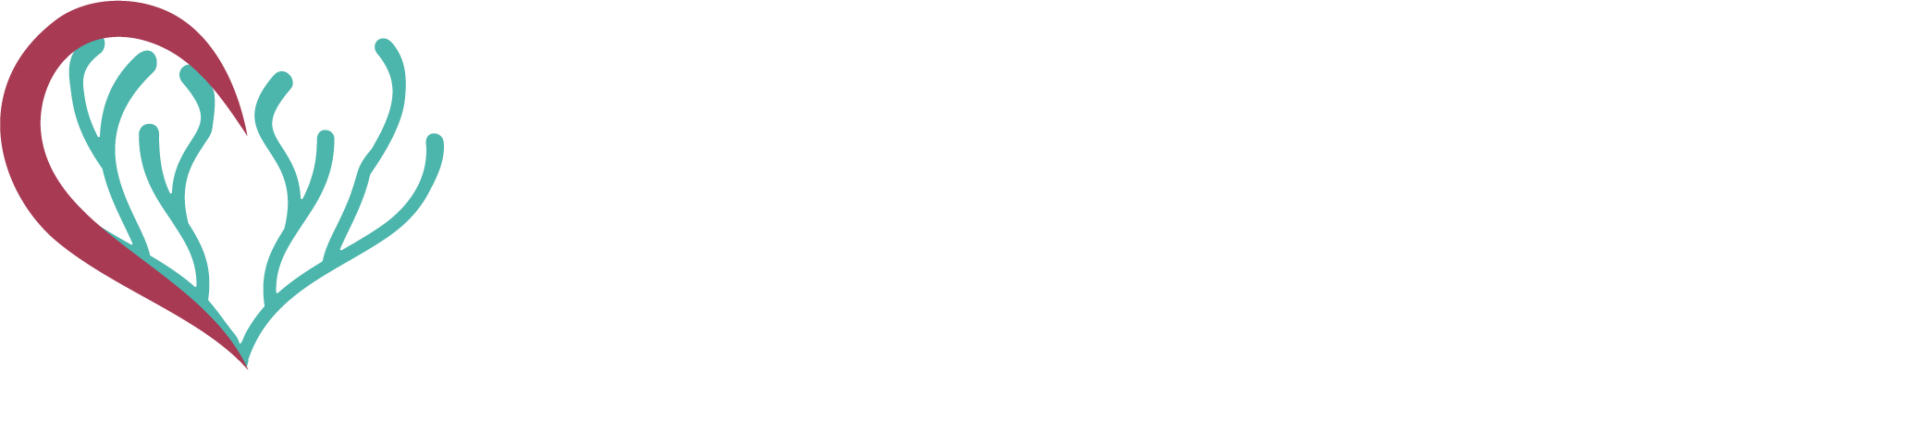 CoralReef-Clinical Trials Logo–WHITE-Final